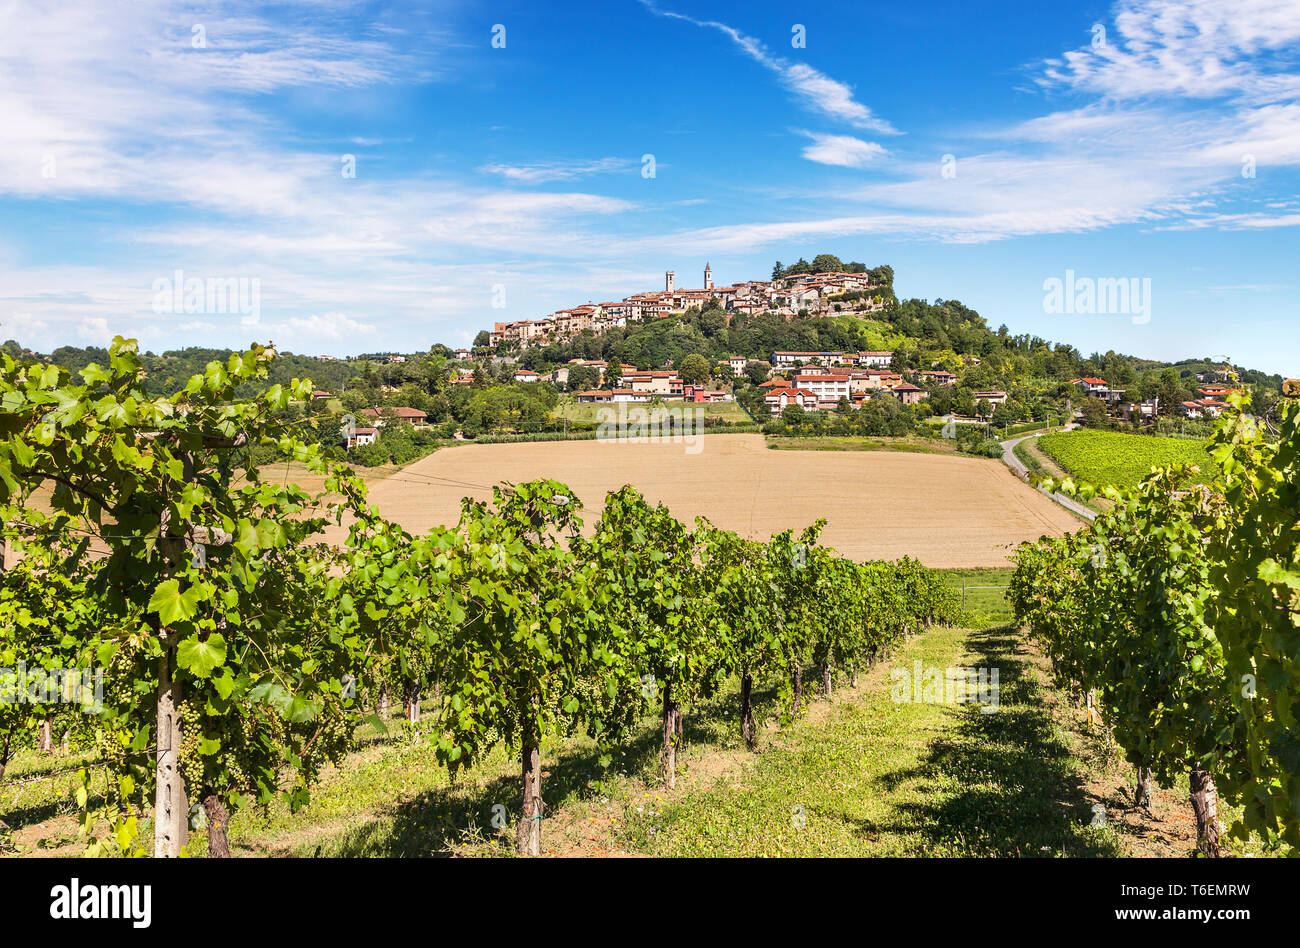 Hilly region of the Langhe with vineyards Stock Photo